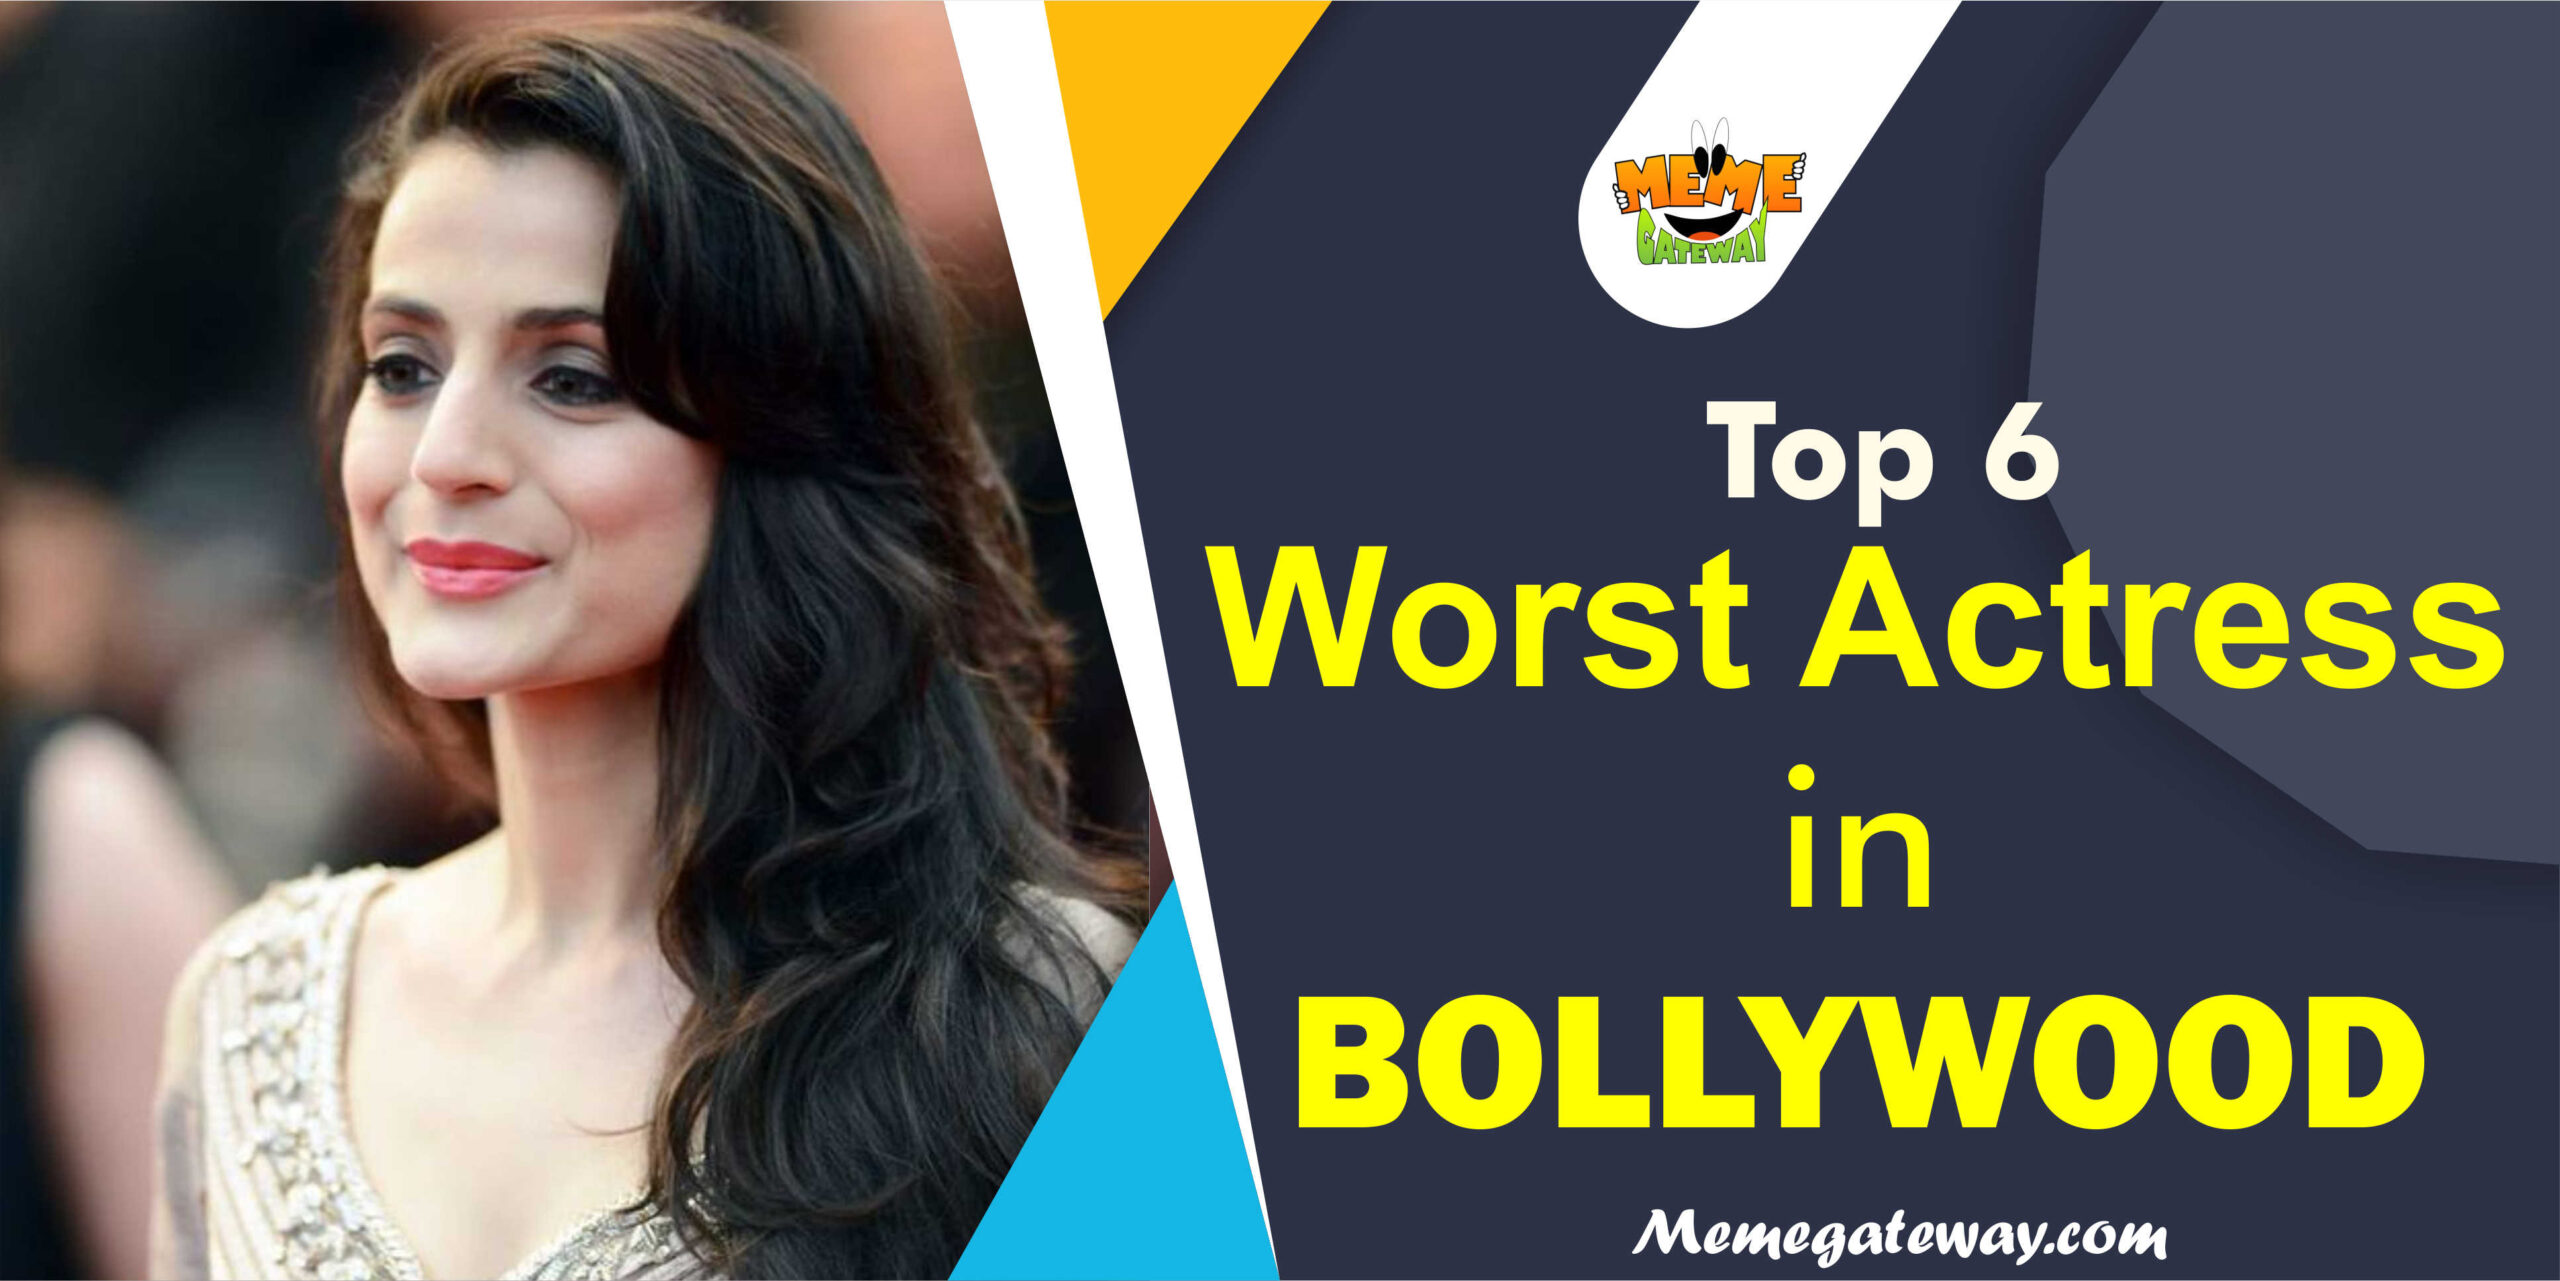 Top 6 Worst Actress In Bollywood